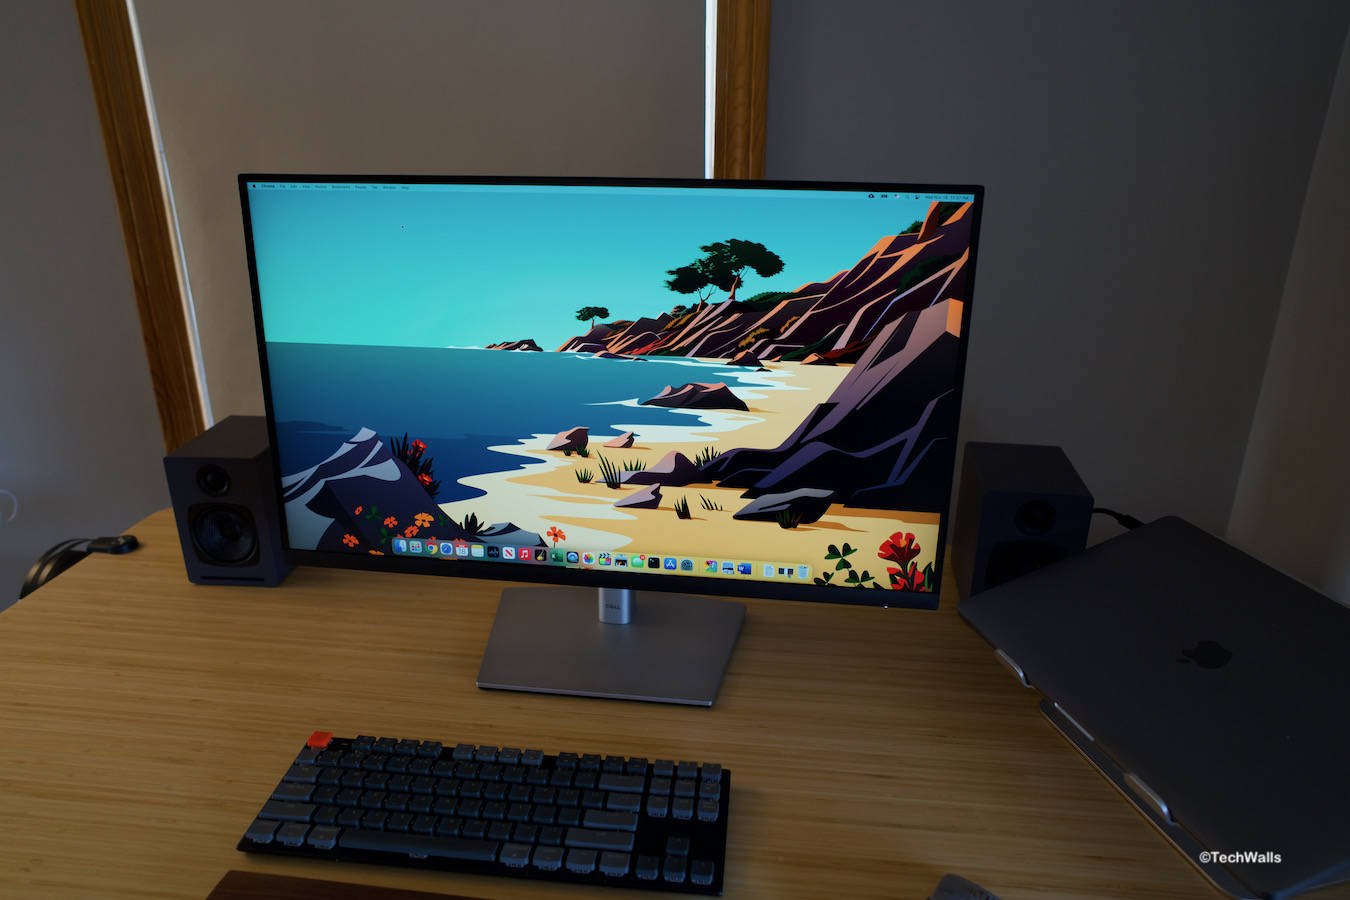 Dell P2721Q 27-inch 4K Monitor Review - Why I Bought This For My Macbook? -  TechWalls